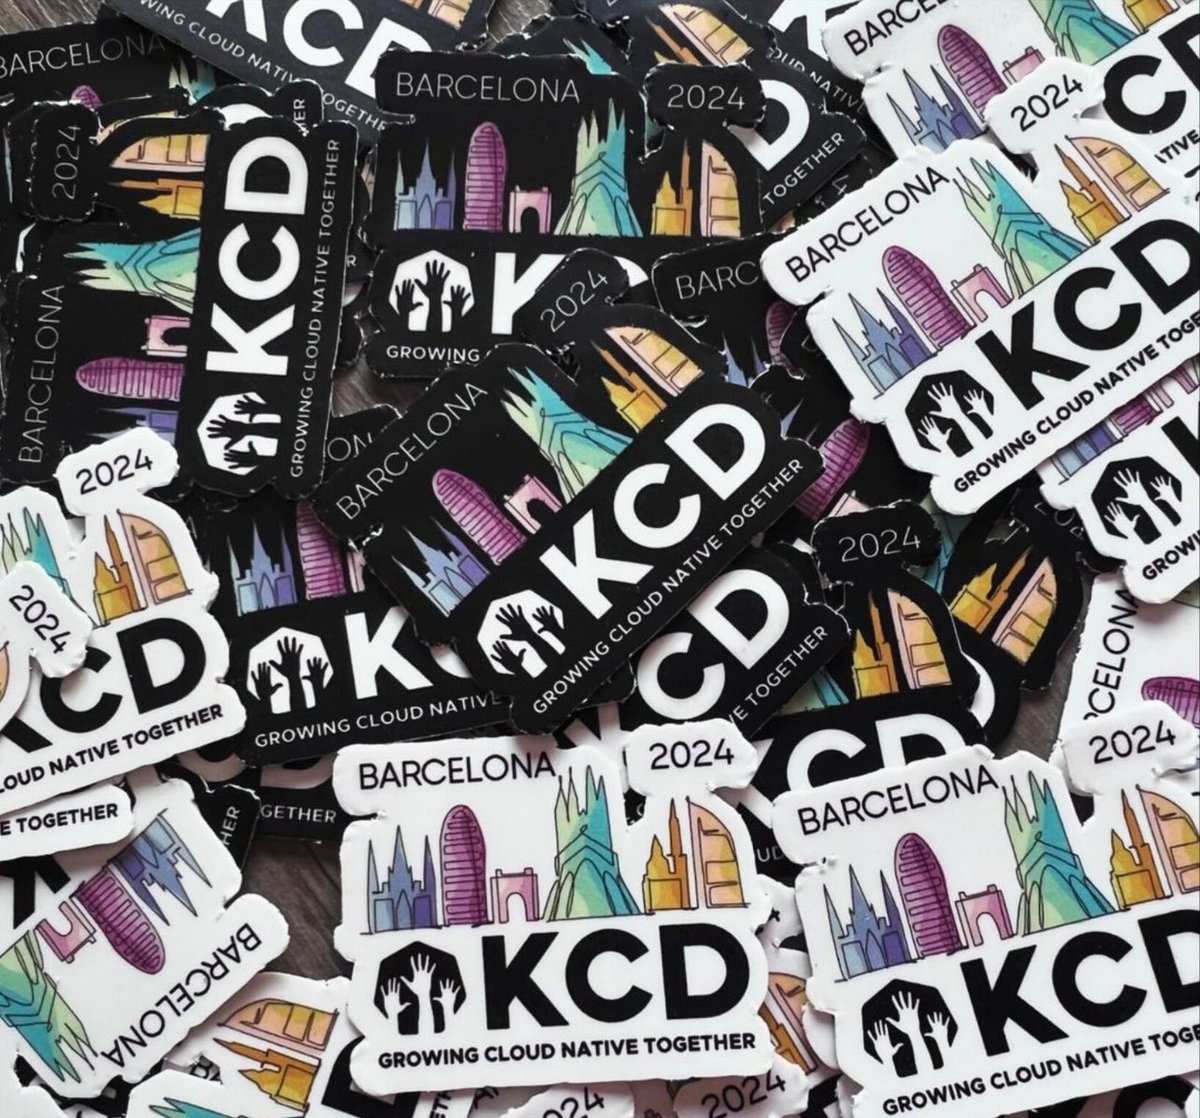 KCD Barcelona 2024 will take place on June 13-14th. The Call For Speakers is still open community.cncf.io/events/details… If you are headed to #KubeCon + #CloudNativeCon Europe next week, we'll be at the Community Event Kiosk (Kiosk PP20-A Project Pavilion) Wednesday from 10:00 to 11:30